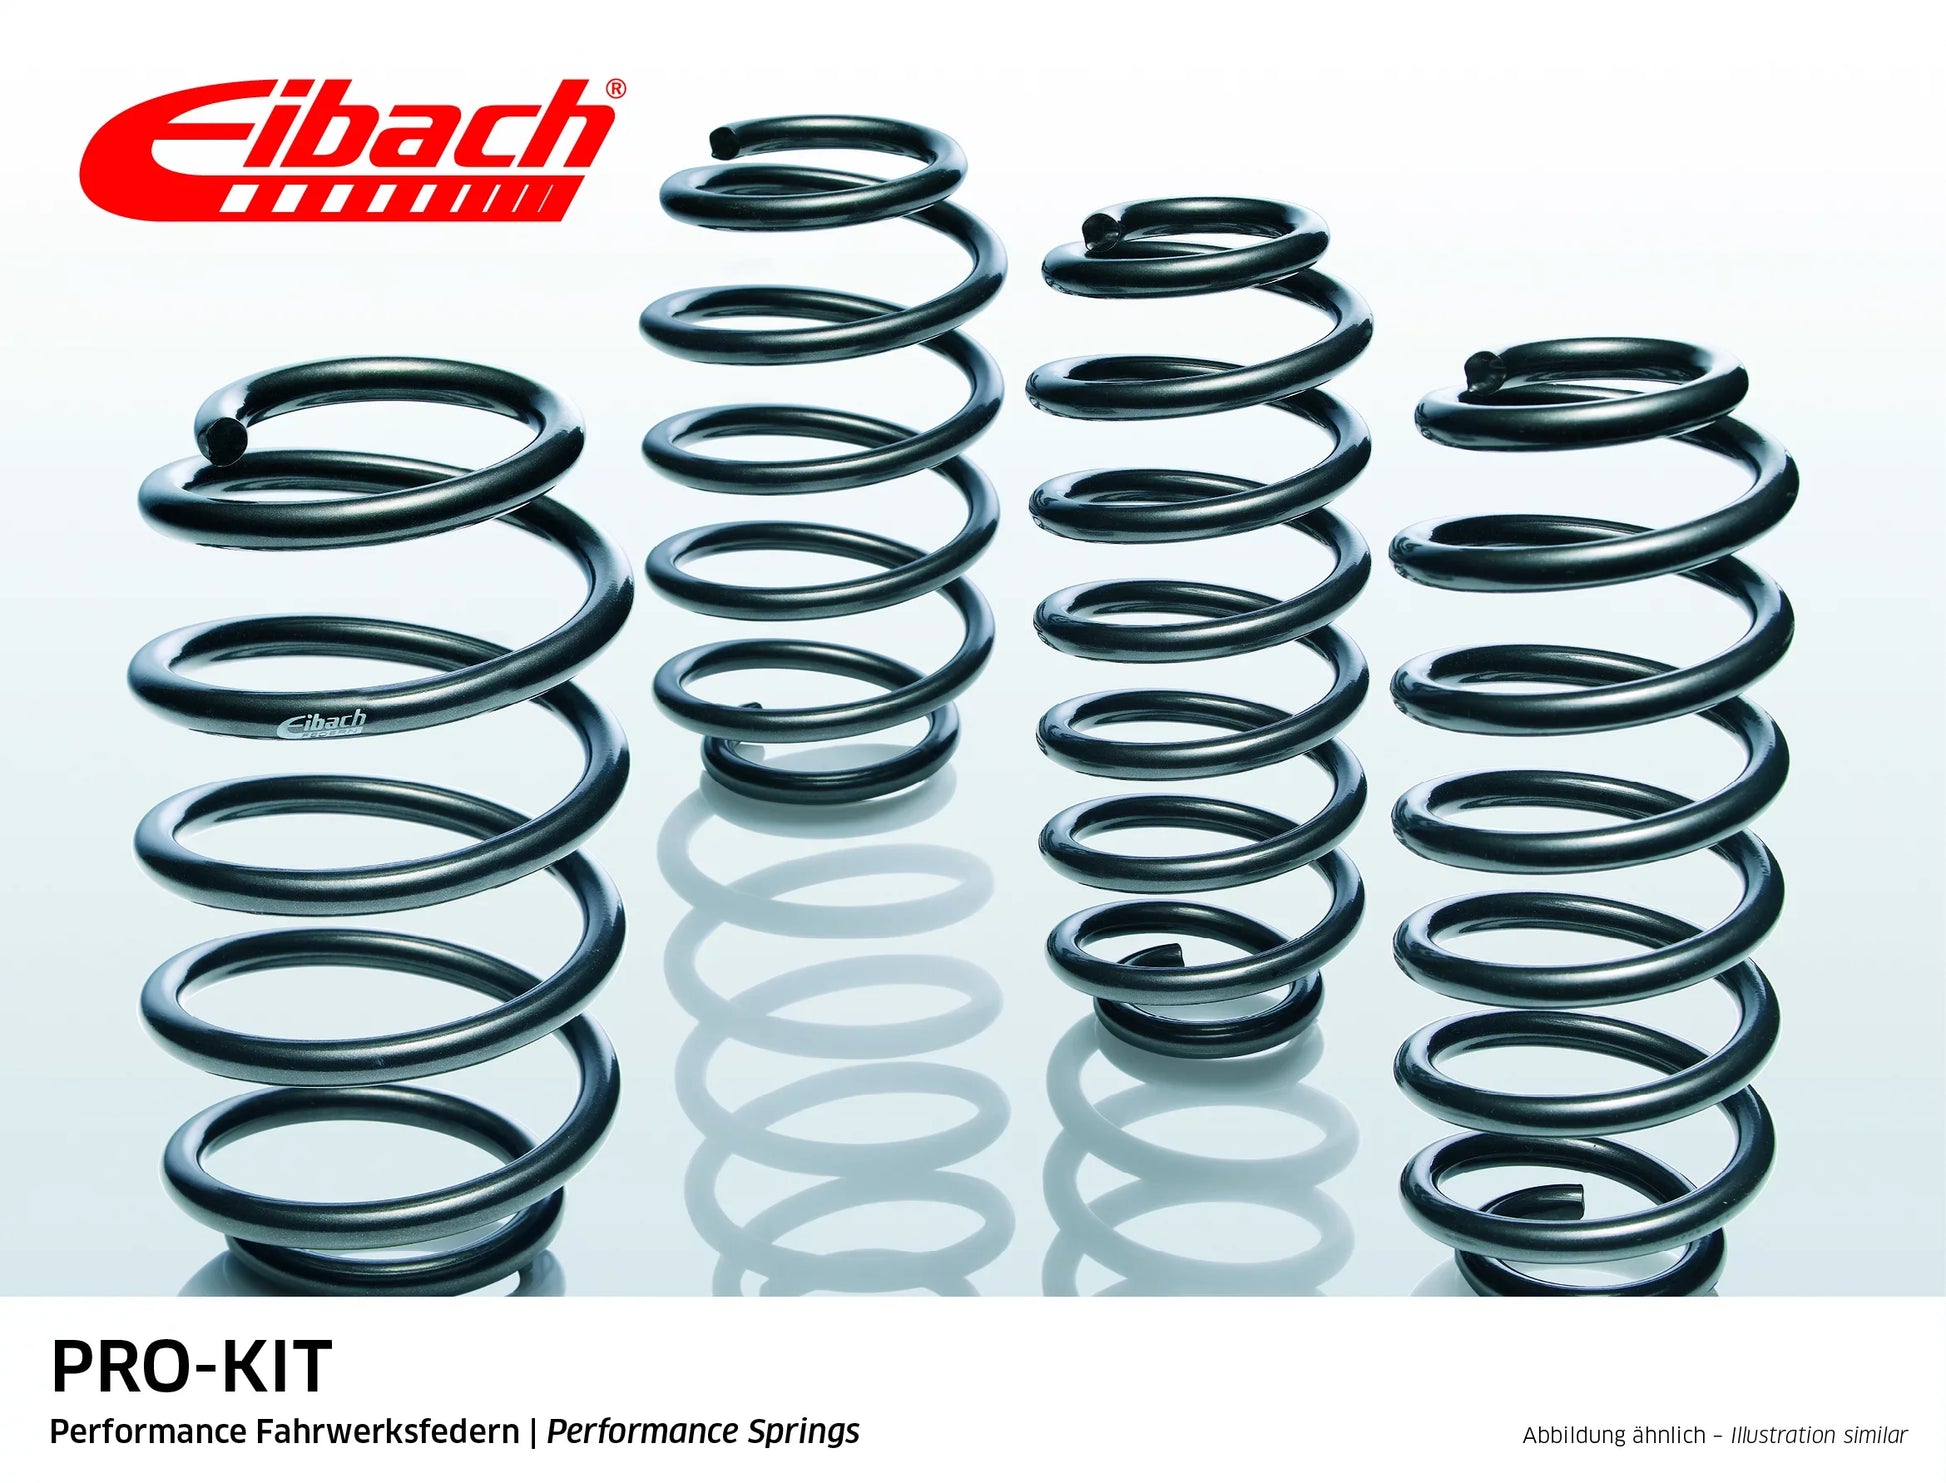 Eibach Pro-Kit Lowering Springs (E10-15-028-04-22) at £350.71